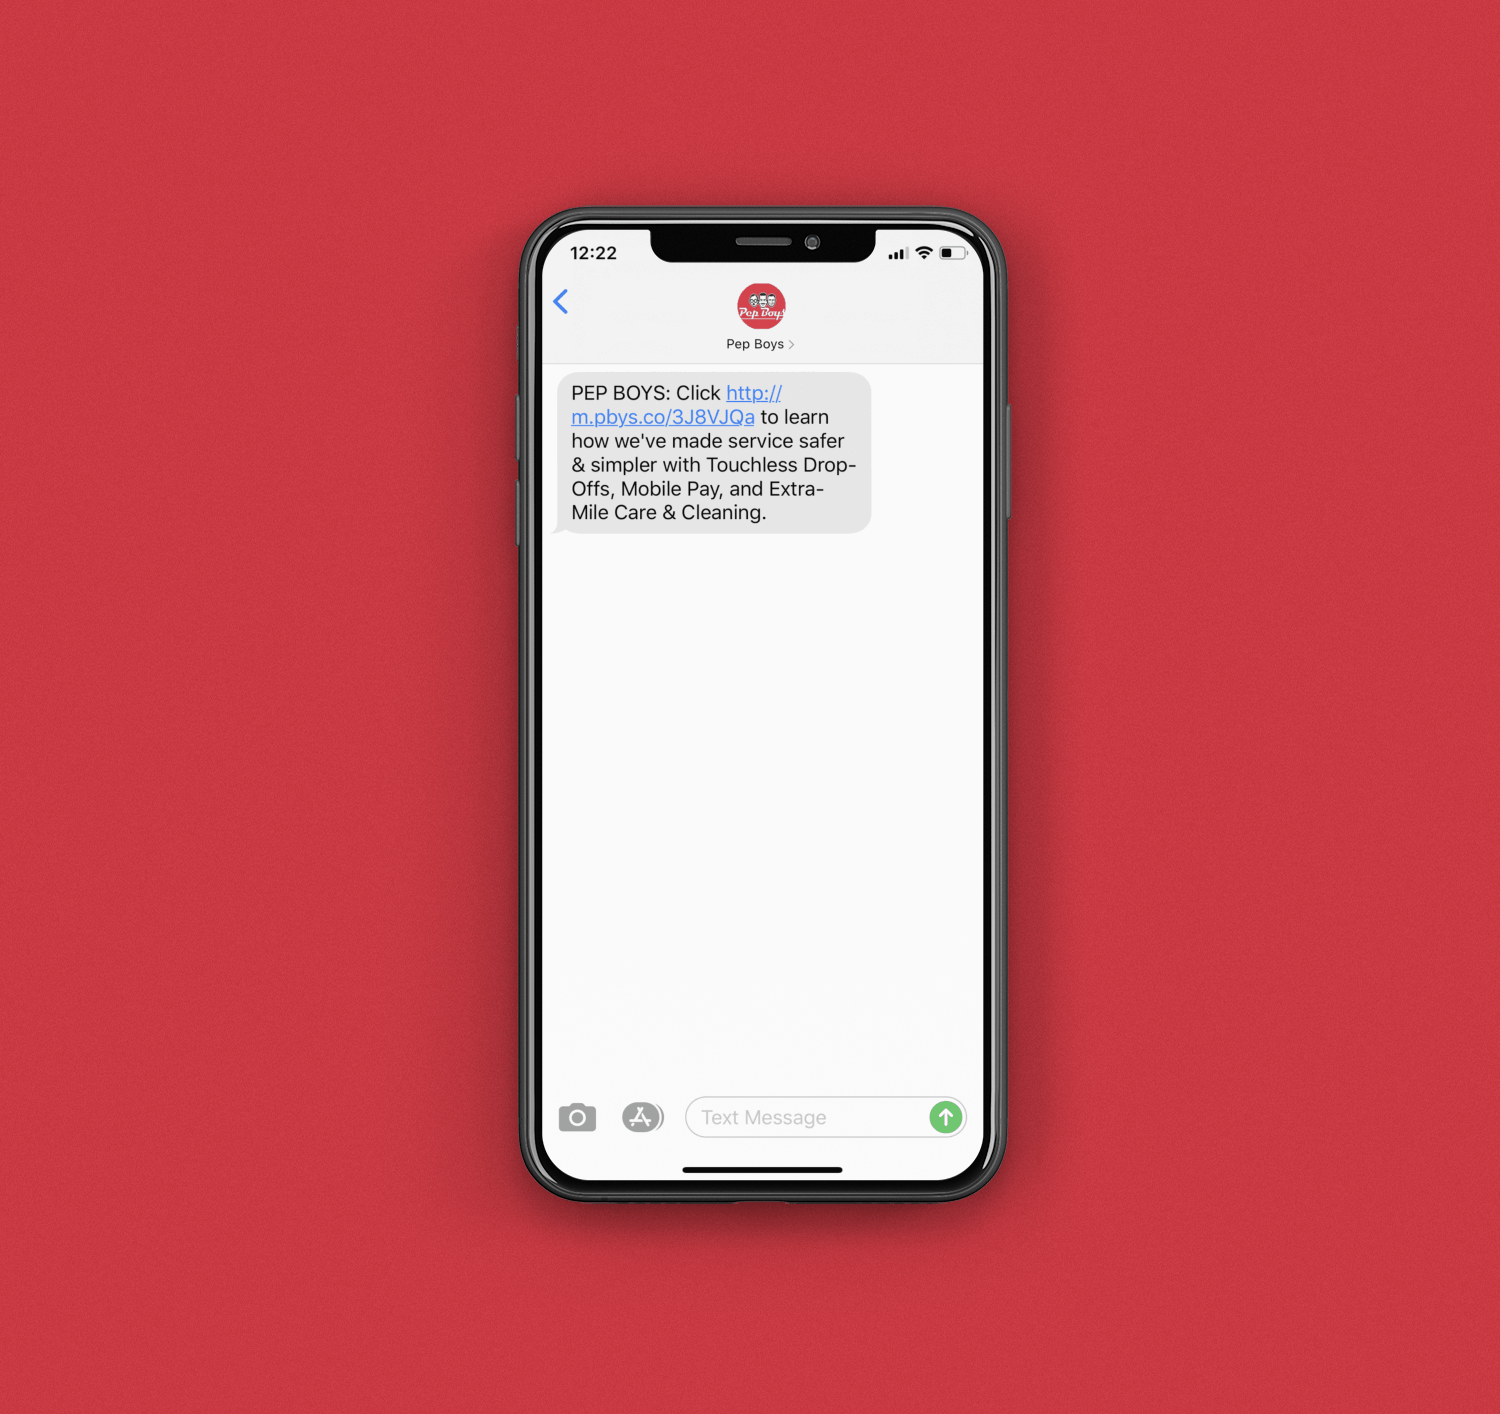 Pep Boys Using Link Shortener for SMS Marketing Messages